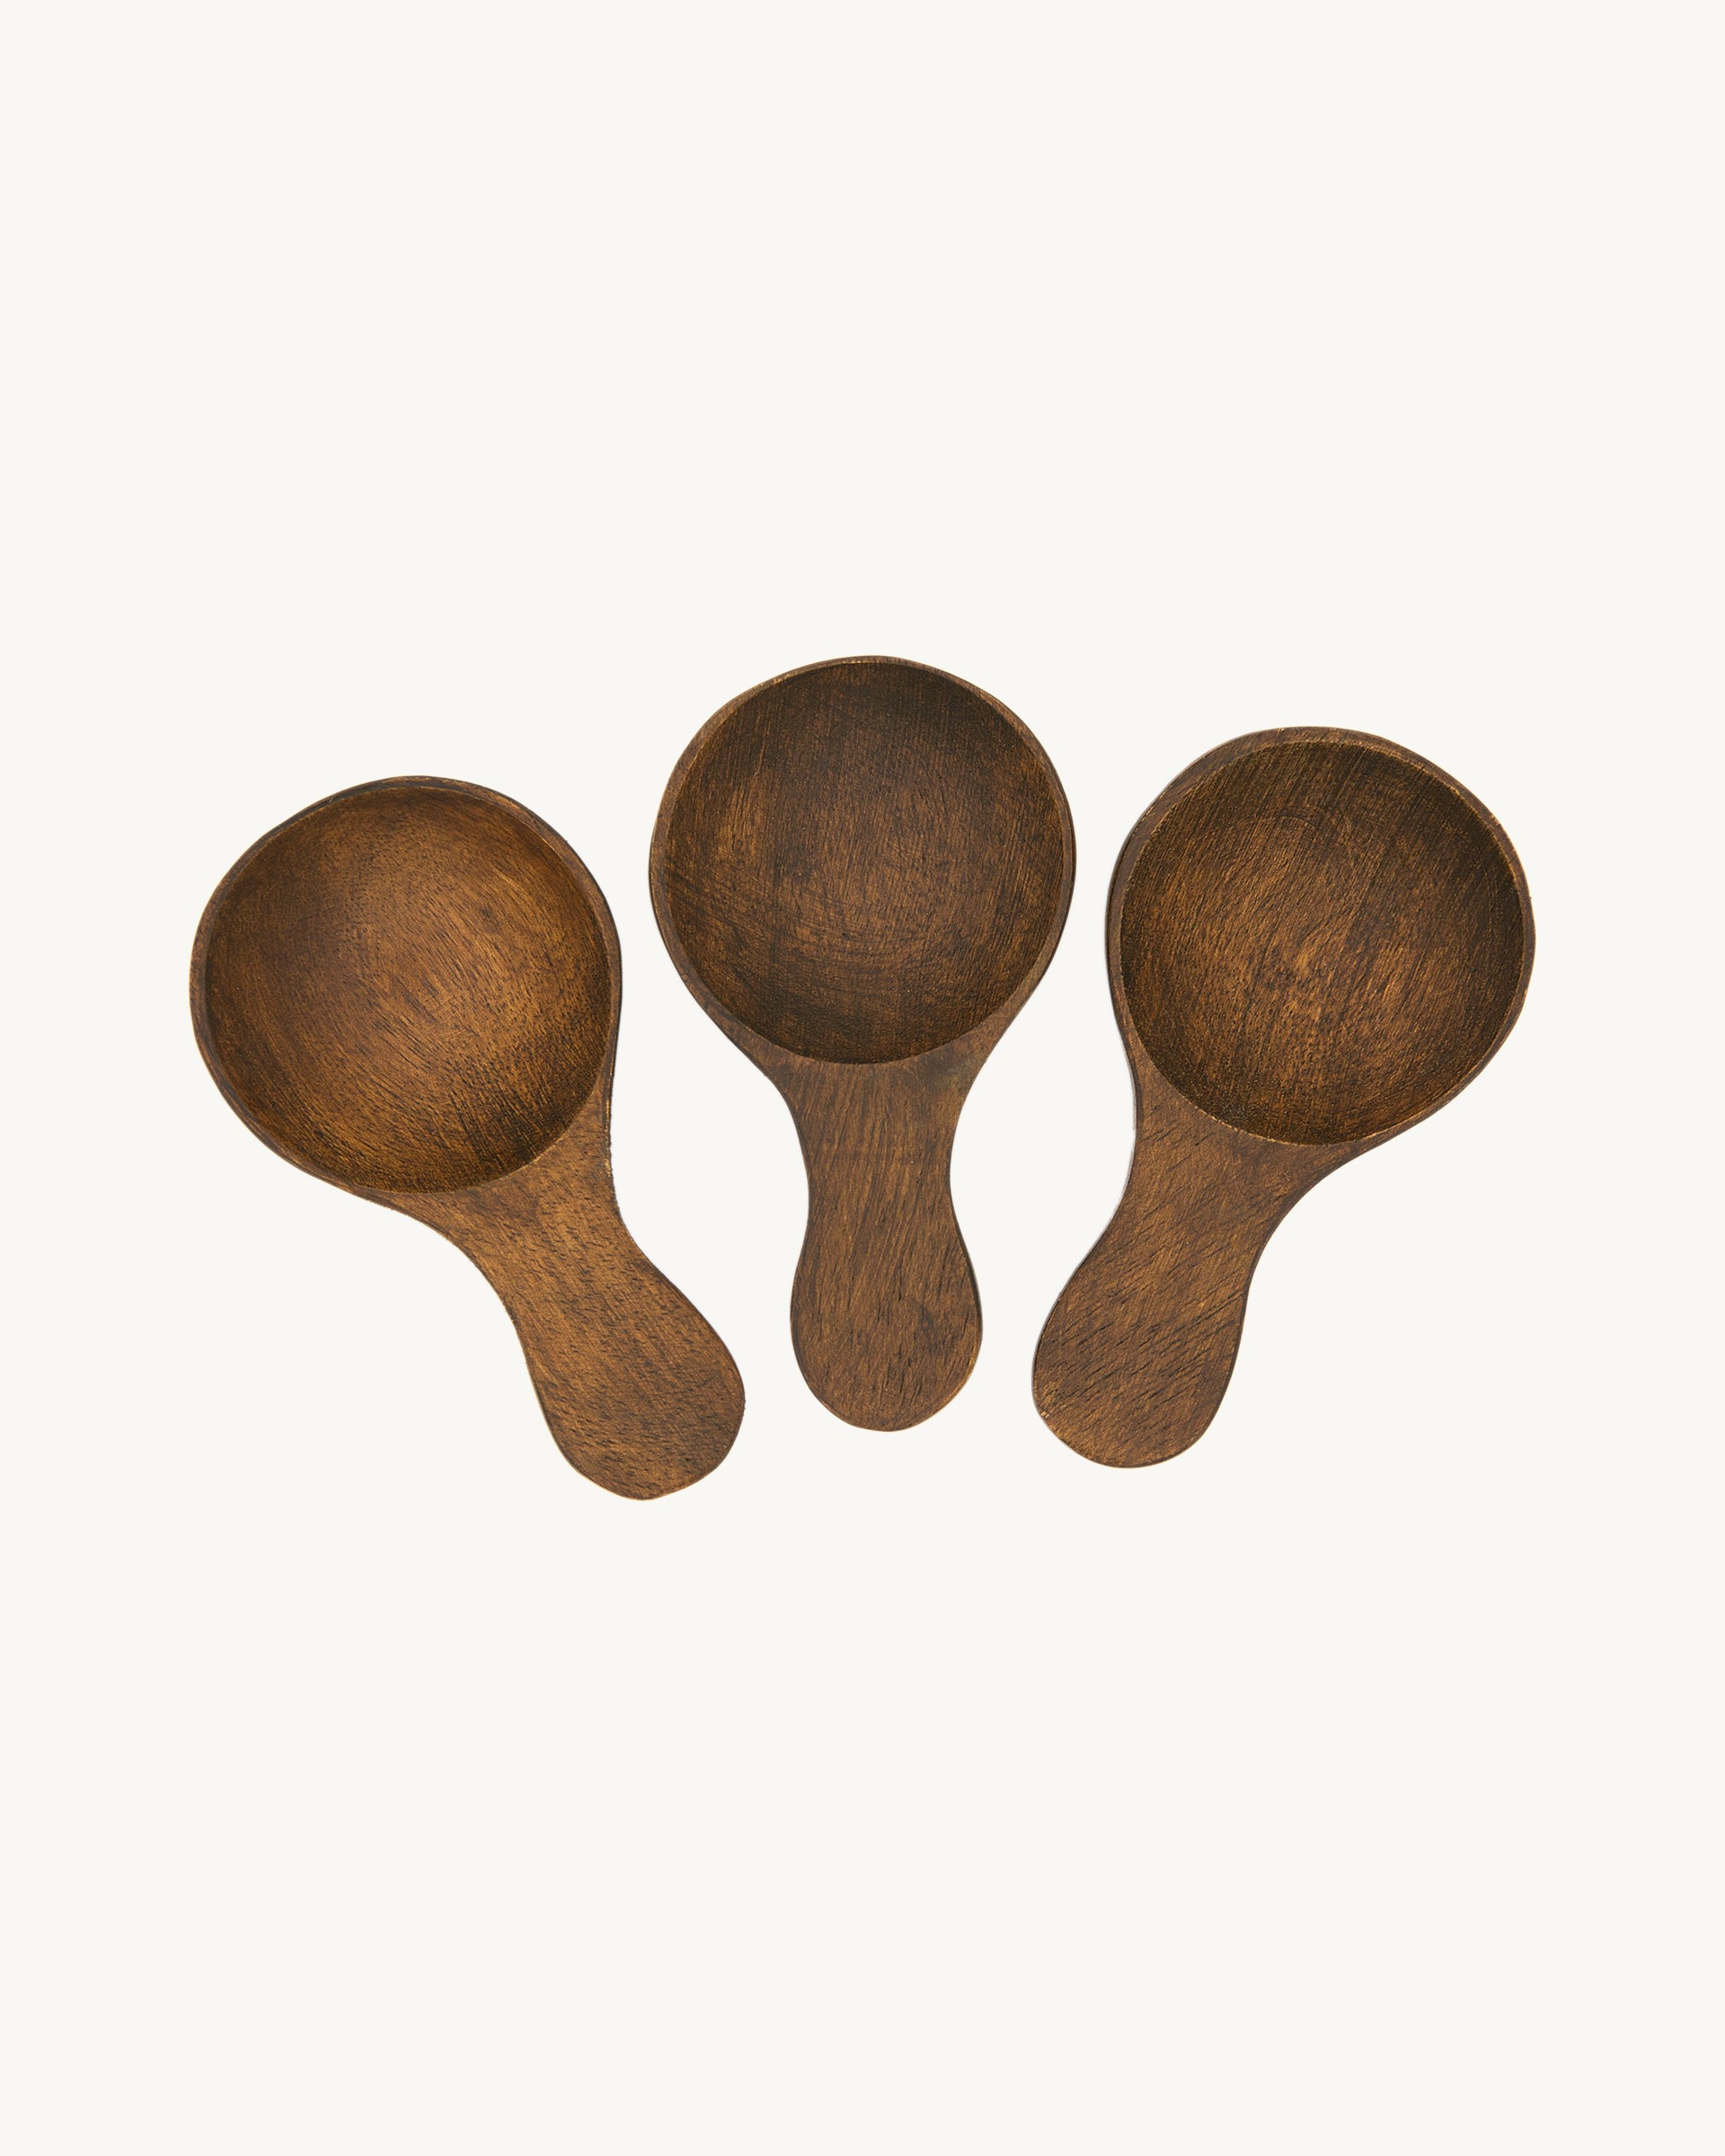 Limited Edition Dark Large Acacia Wood Scoops (Single or Set of 3)